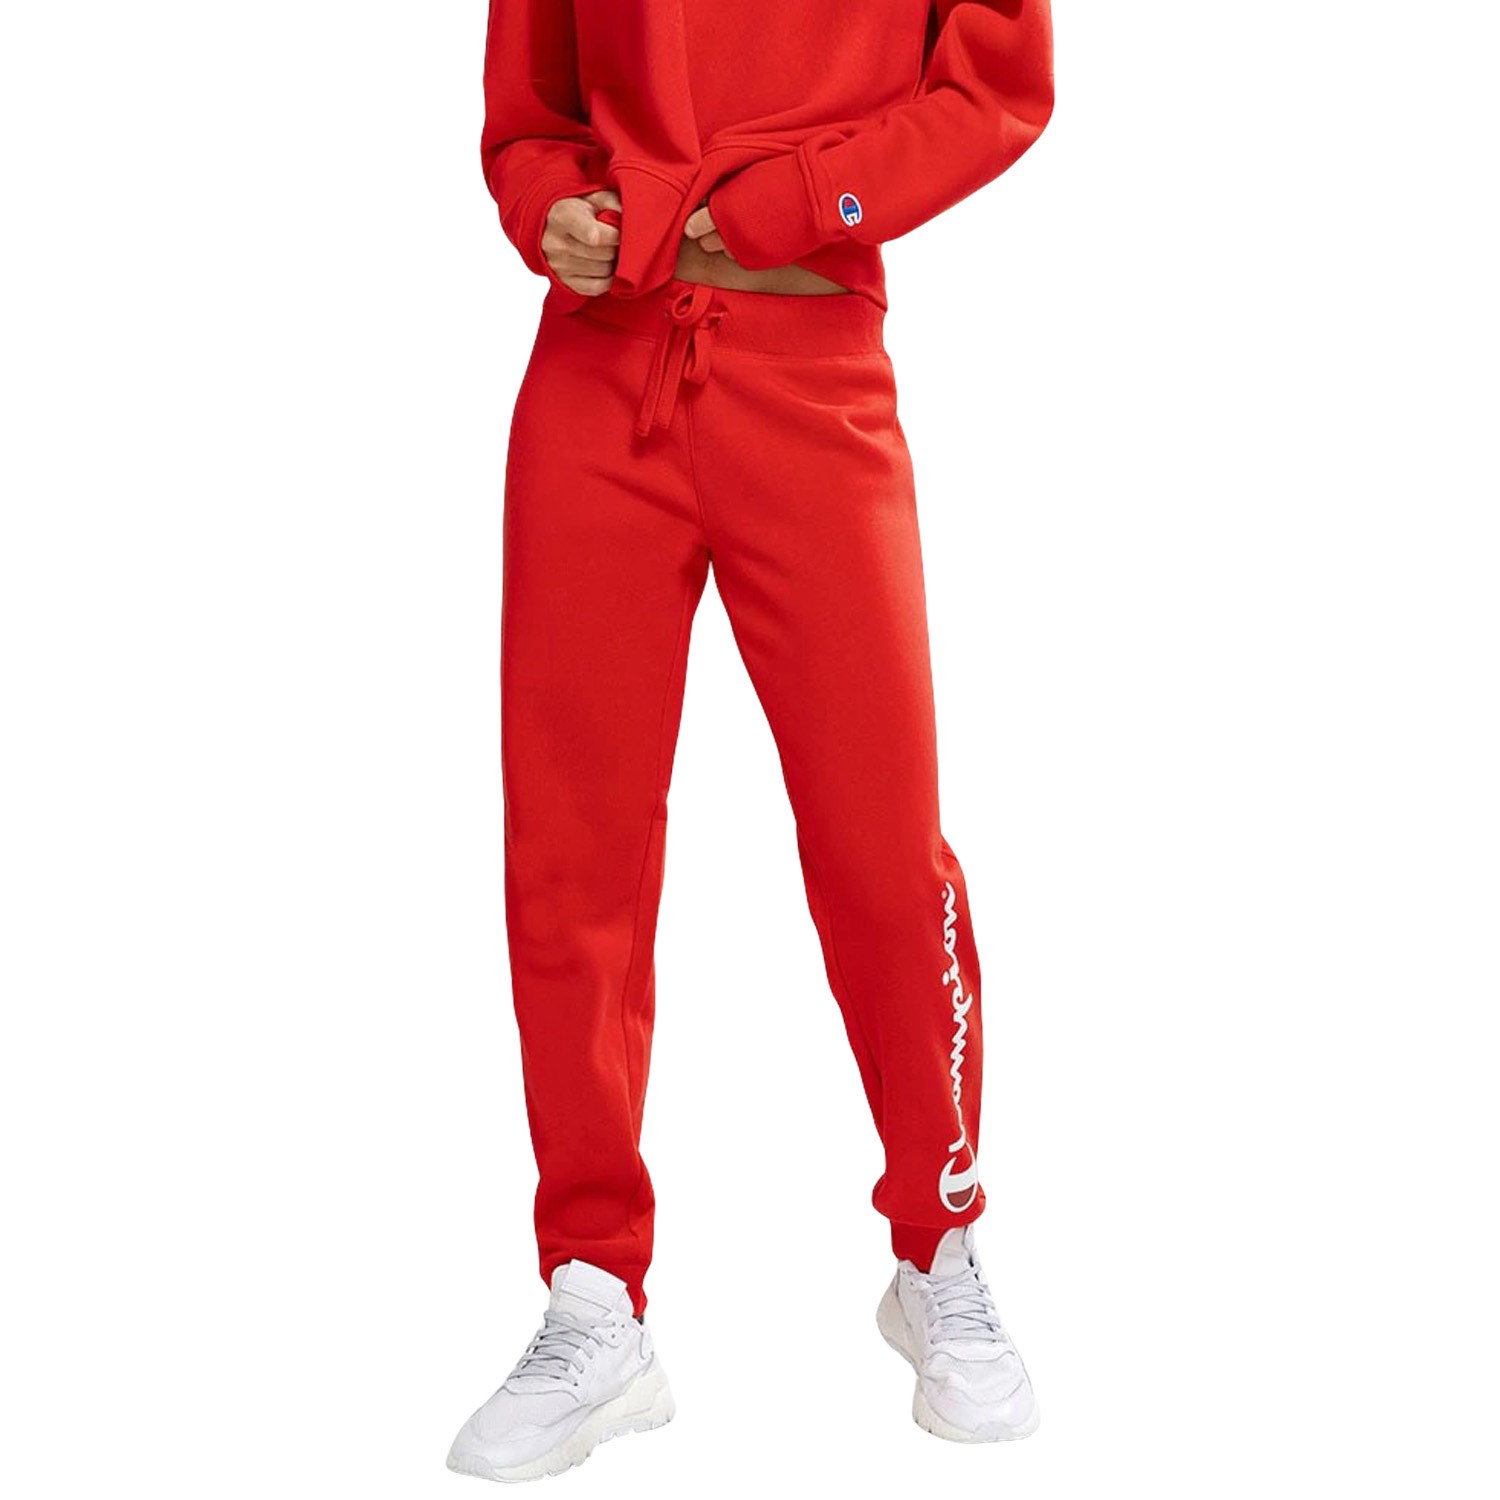 Champion Track pants and jogging bottoms for Women